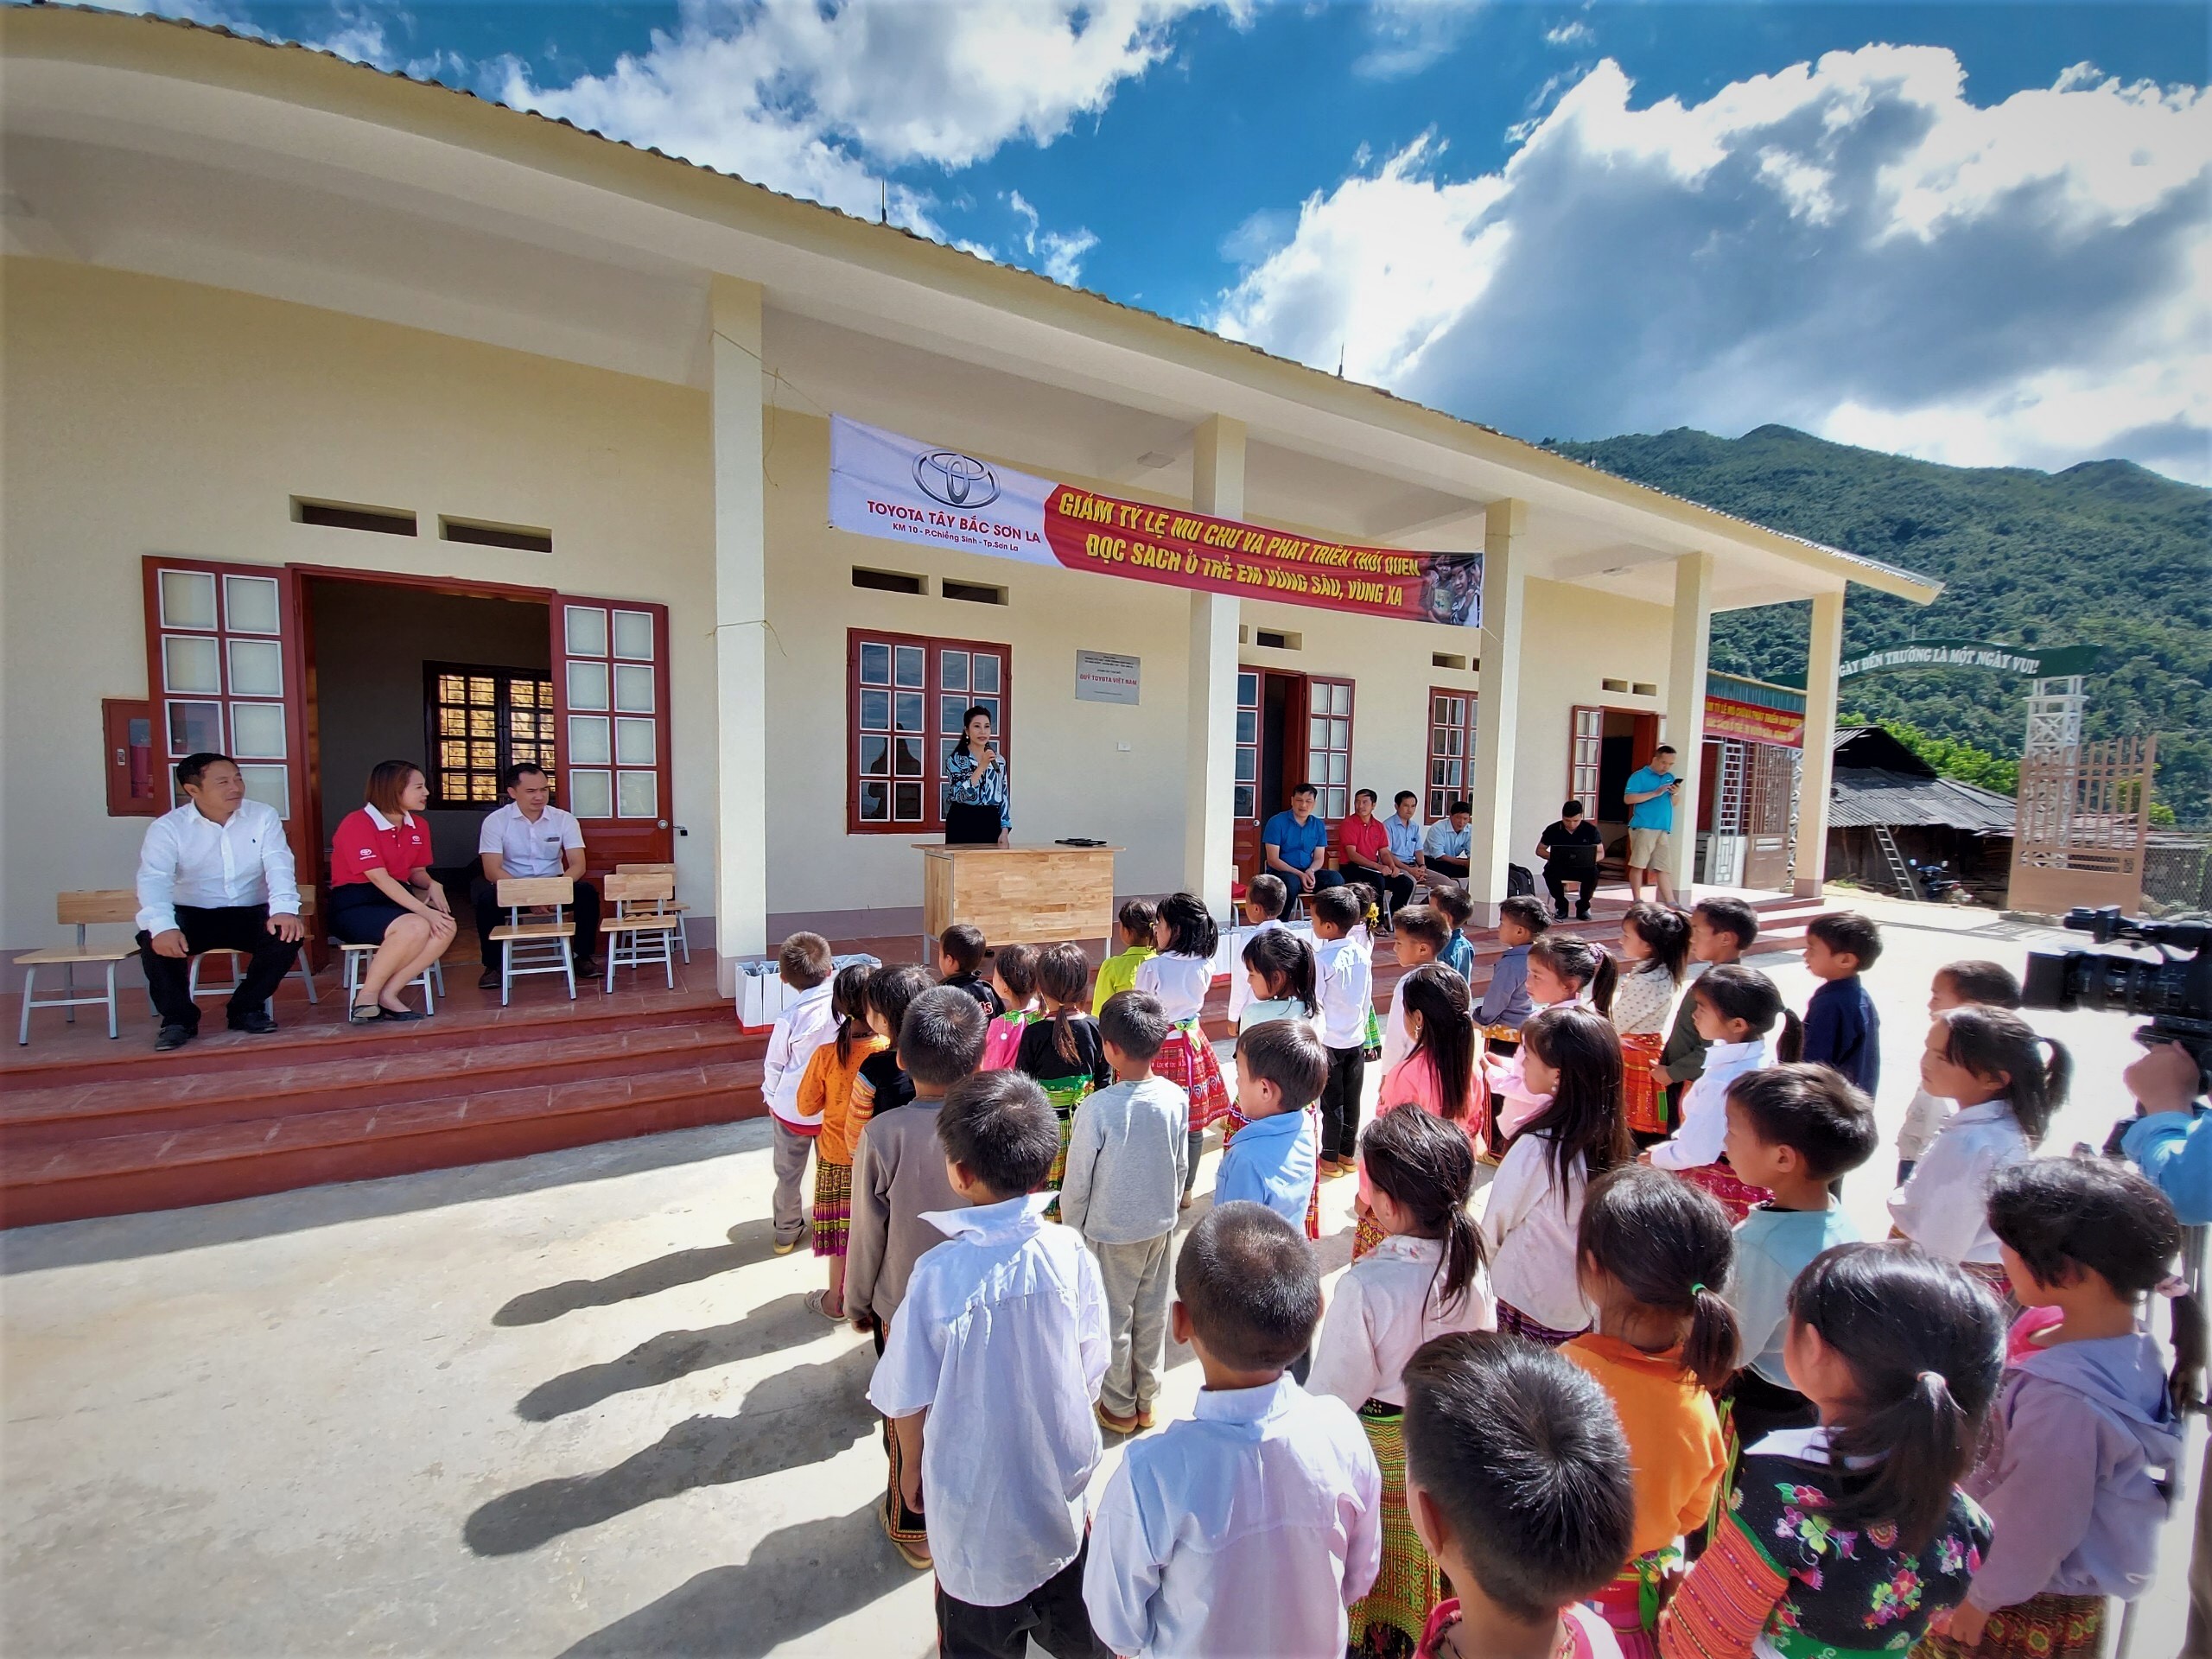 quy-toyota-viet-nam-hanh-ban-giao-diem-truong-tieu-hoc-hang-dong-a-toyota-vietnam-foundation-handed-over-the-hang-dong-a-primary-site-school.jpg